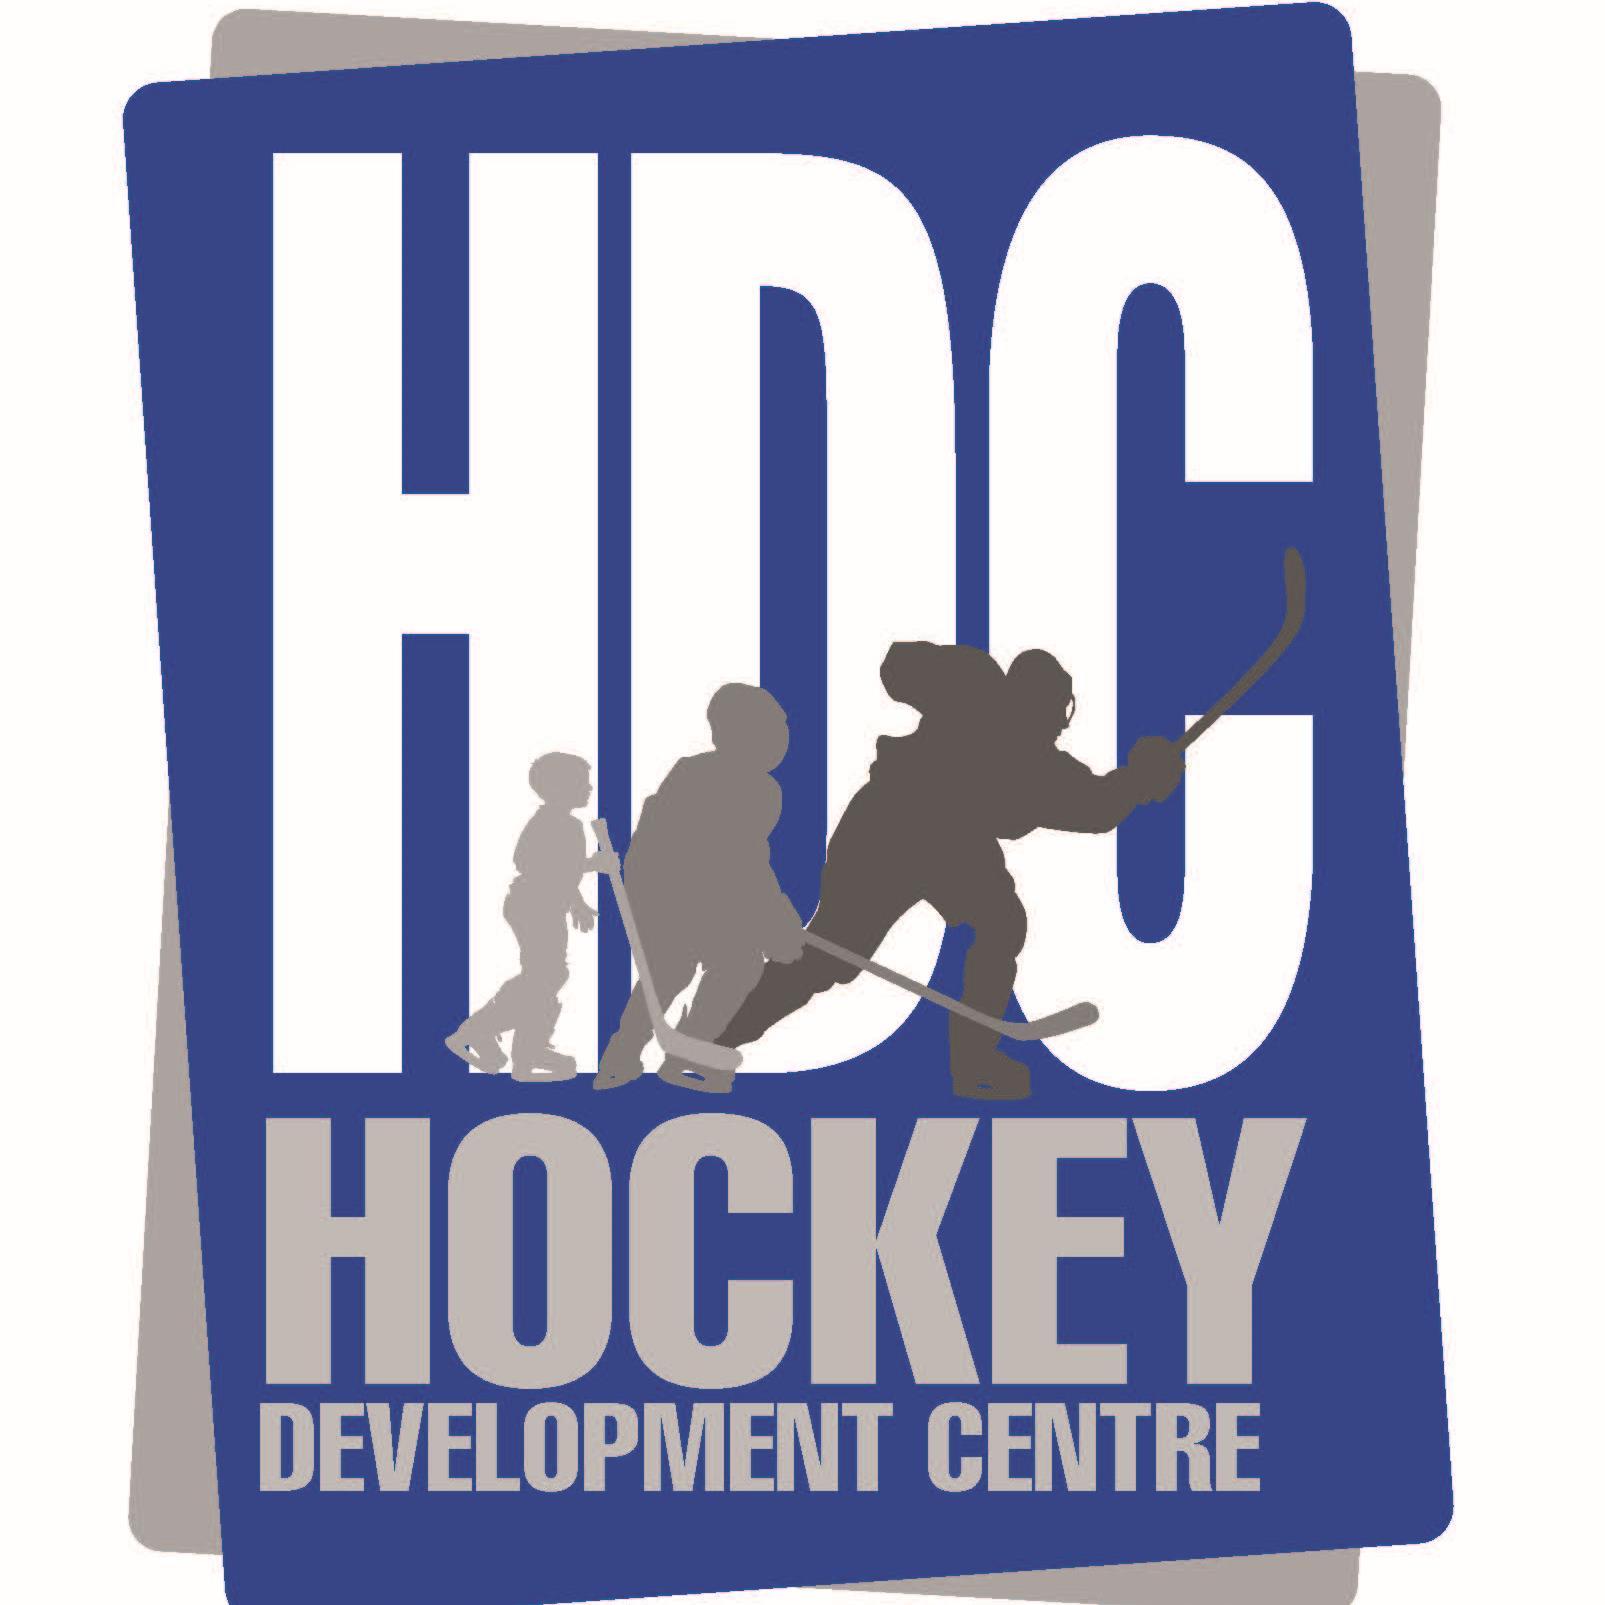 HDC is a State-of-the-art sports training and recreational facility providing professional on-ice and off-ice athletic development. Owned by Sean McCarry